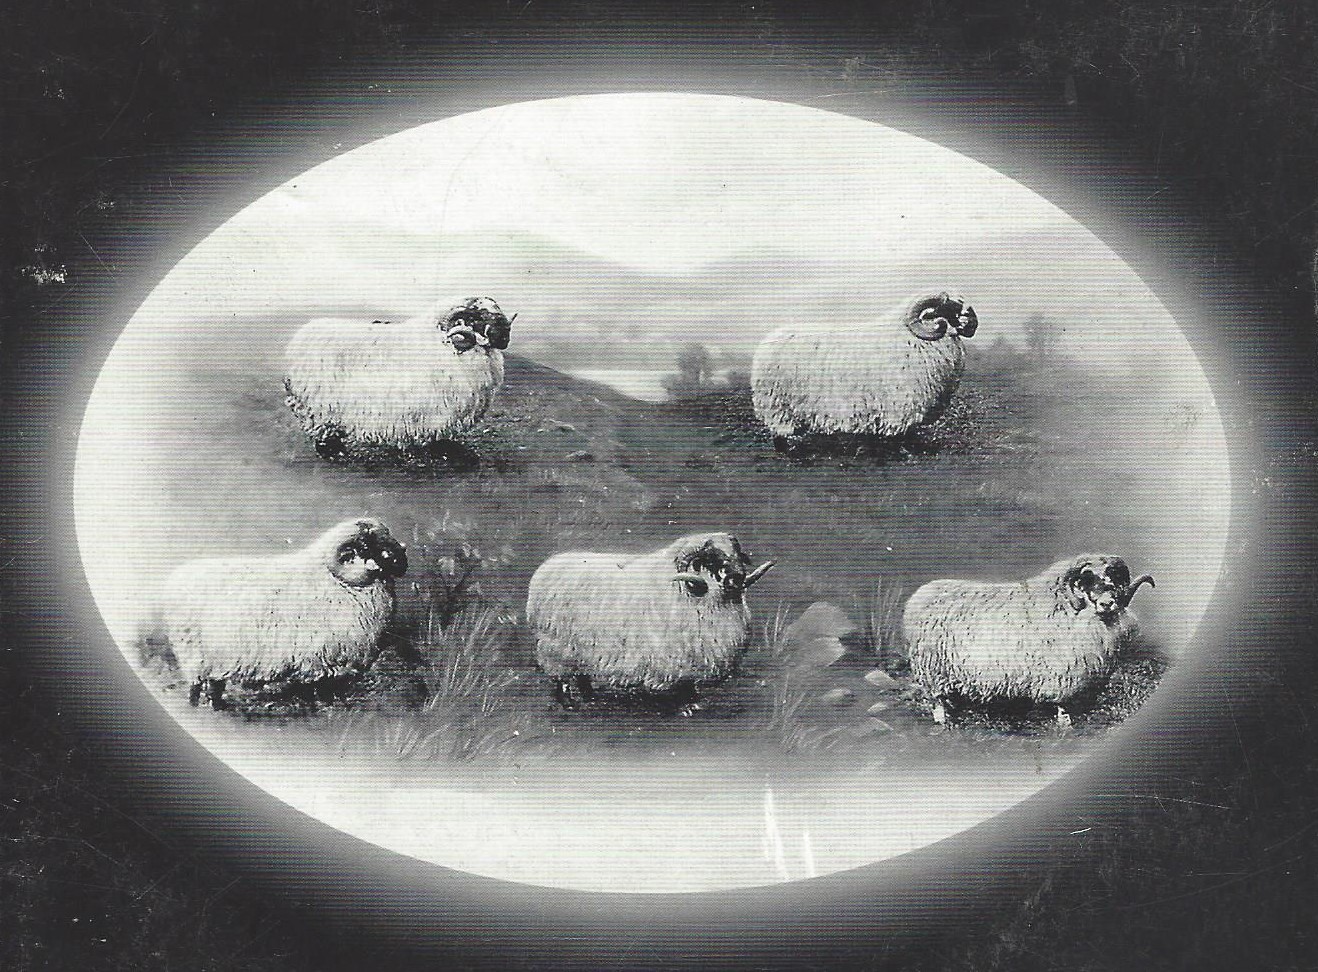 The photographers art back in the early 1900s in a depiction of famous Woolfords sheep